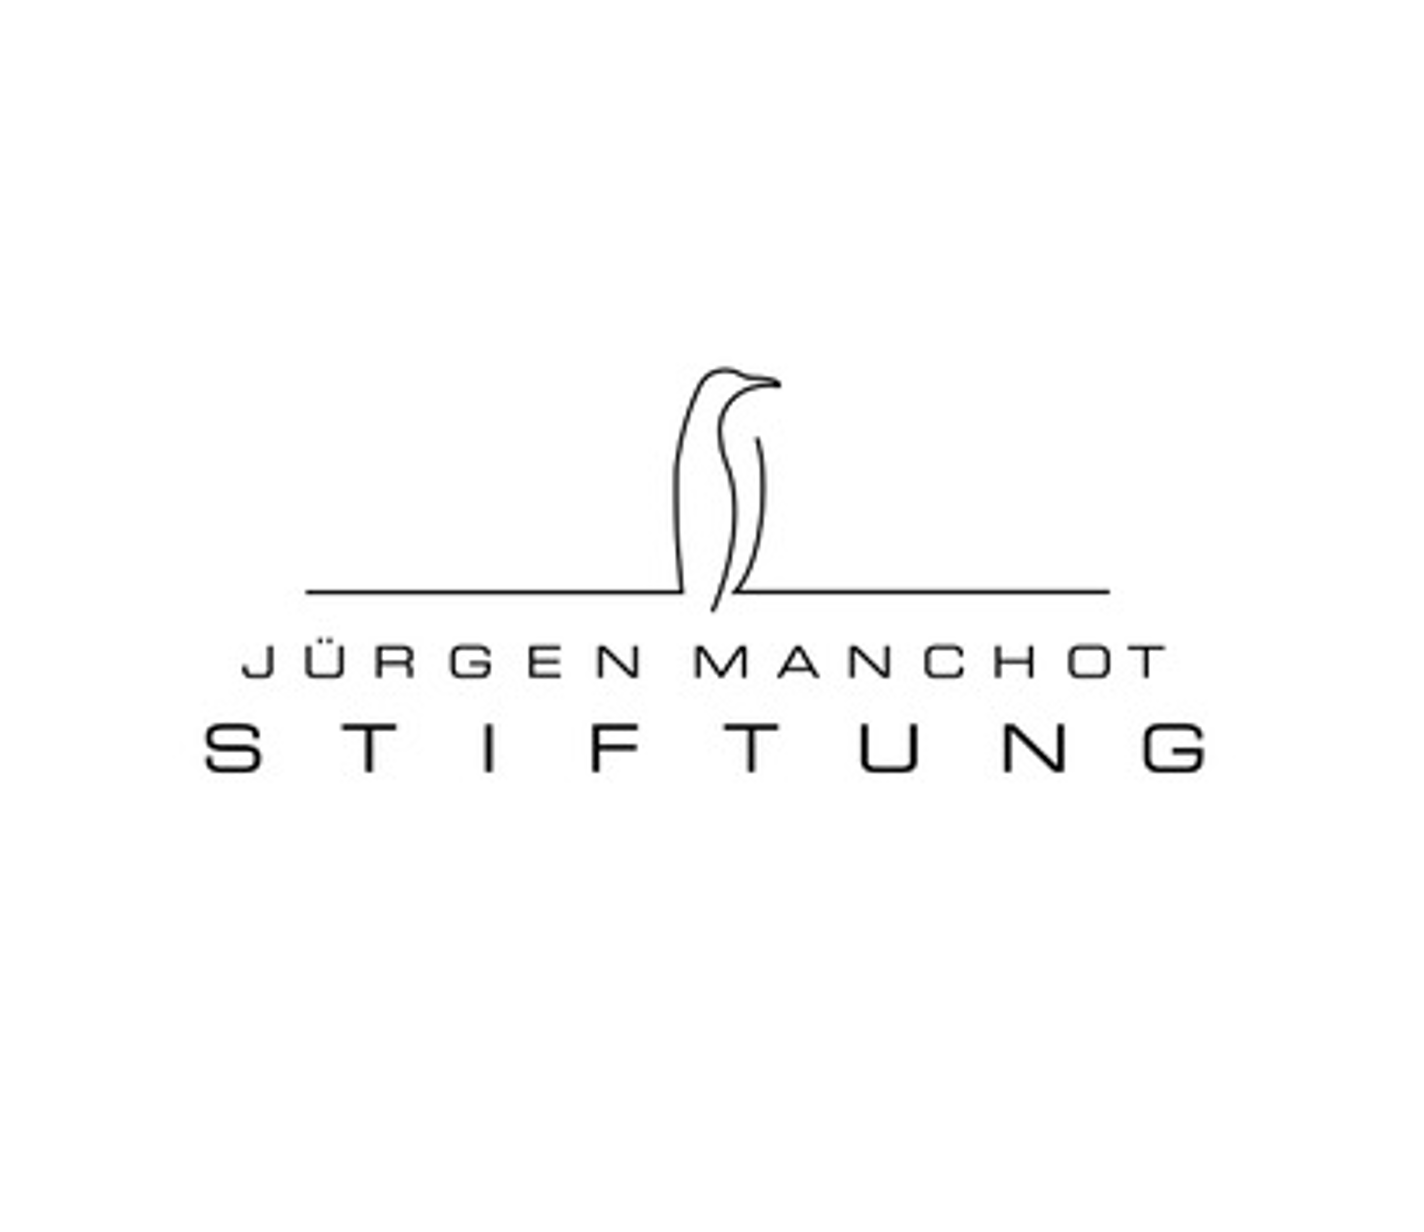 The picture shows the logo of the Jürgen Manchot Foundation.